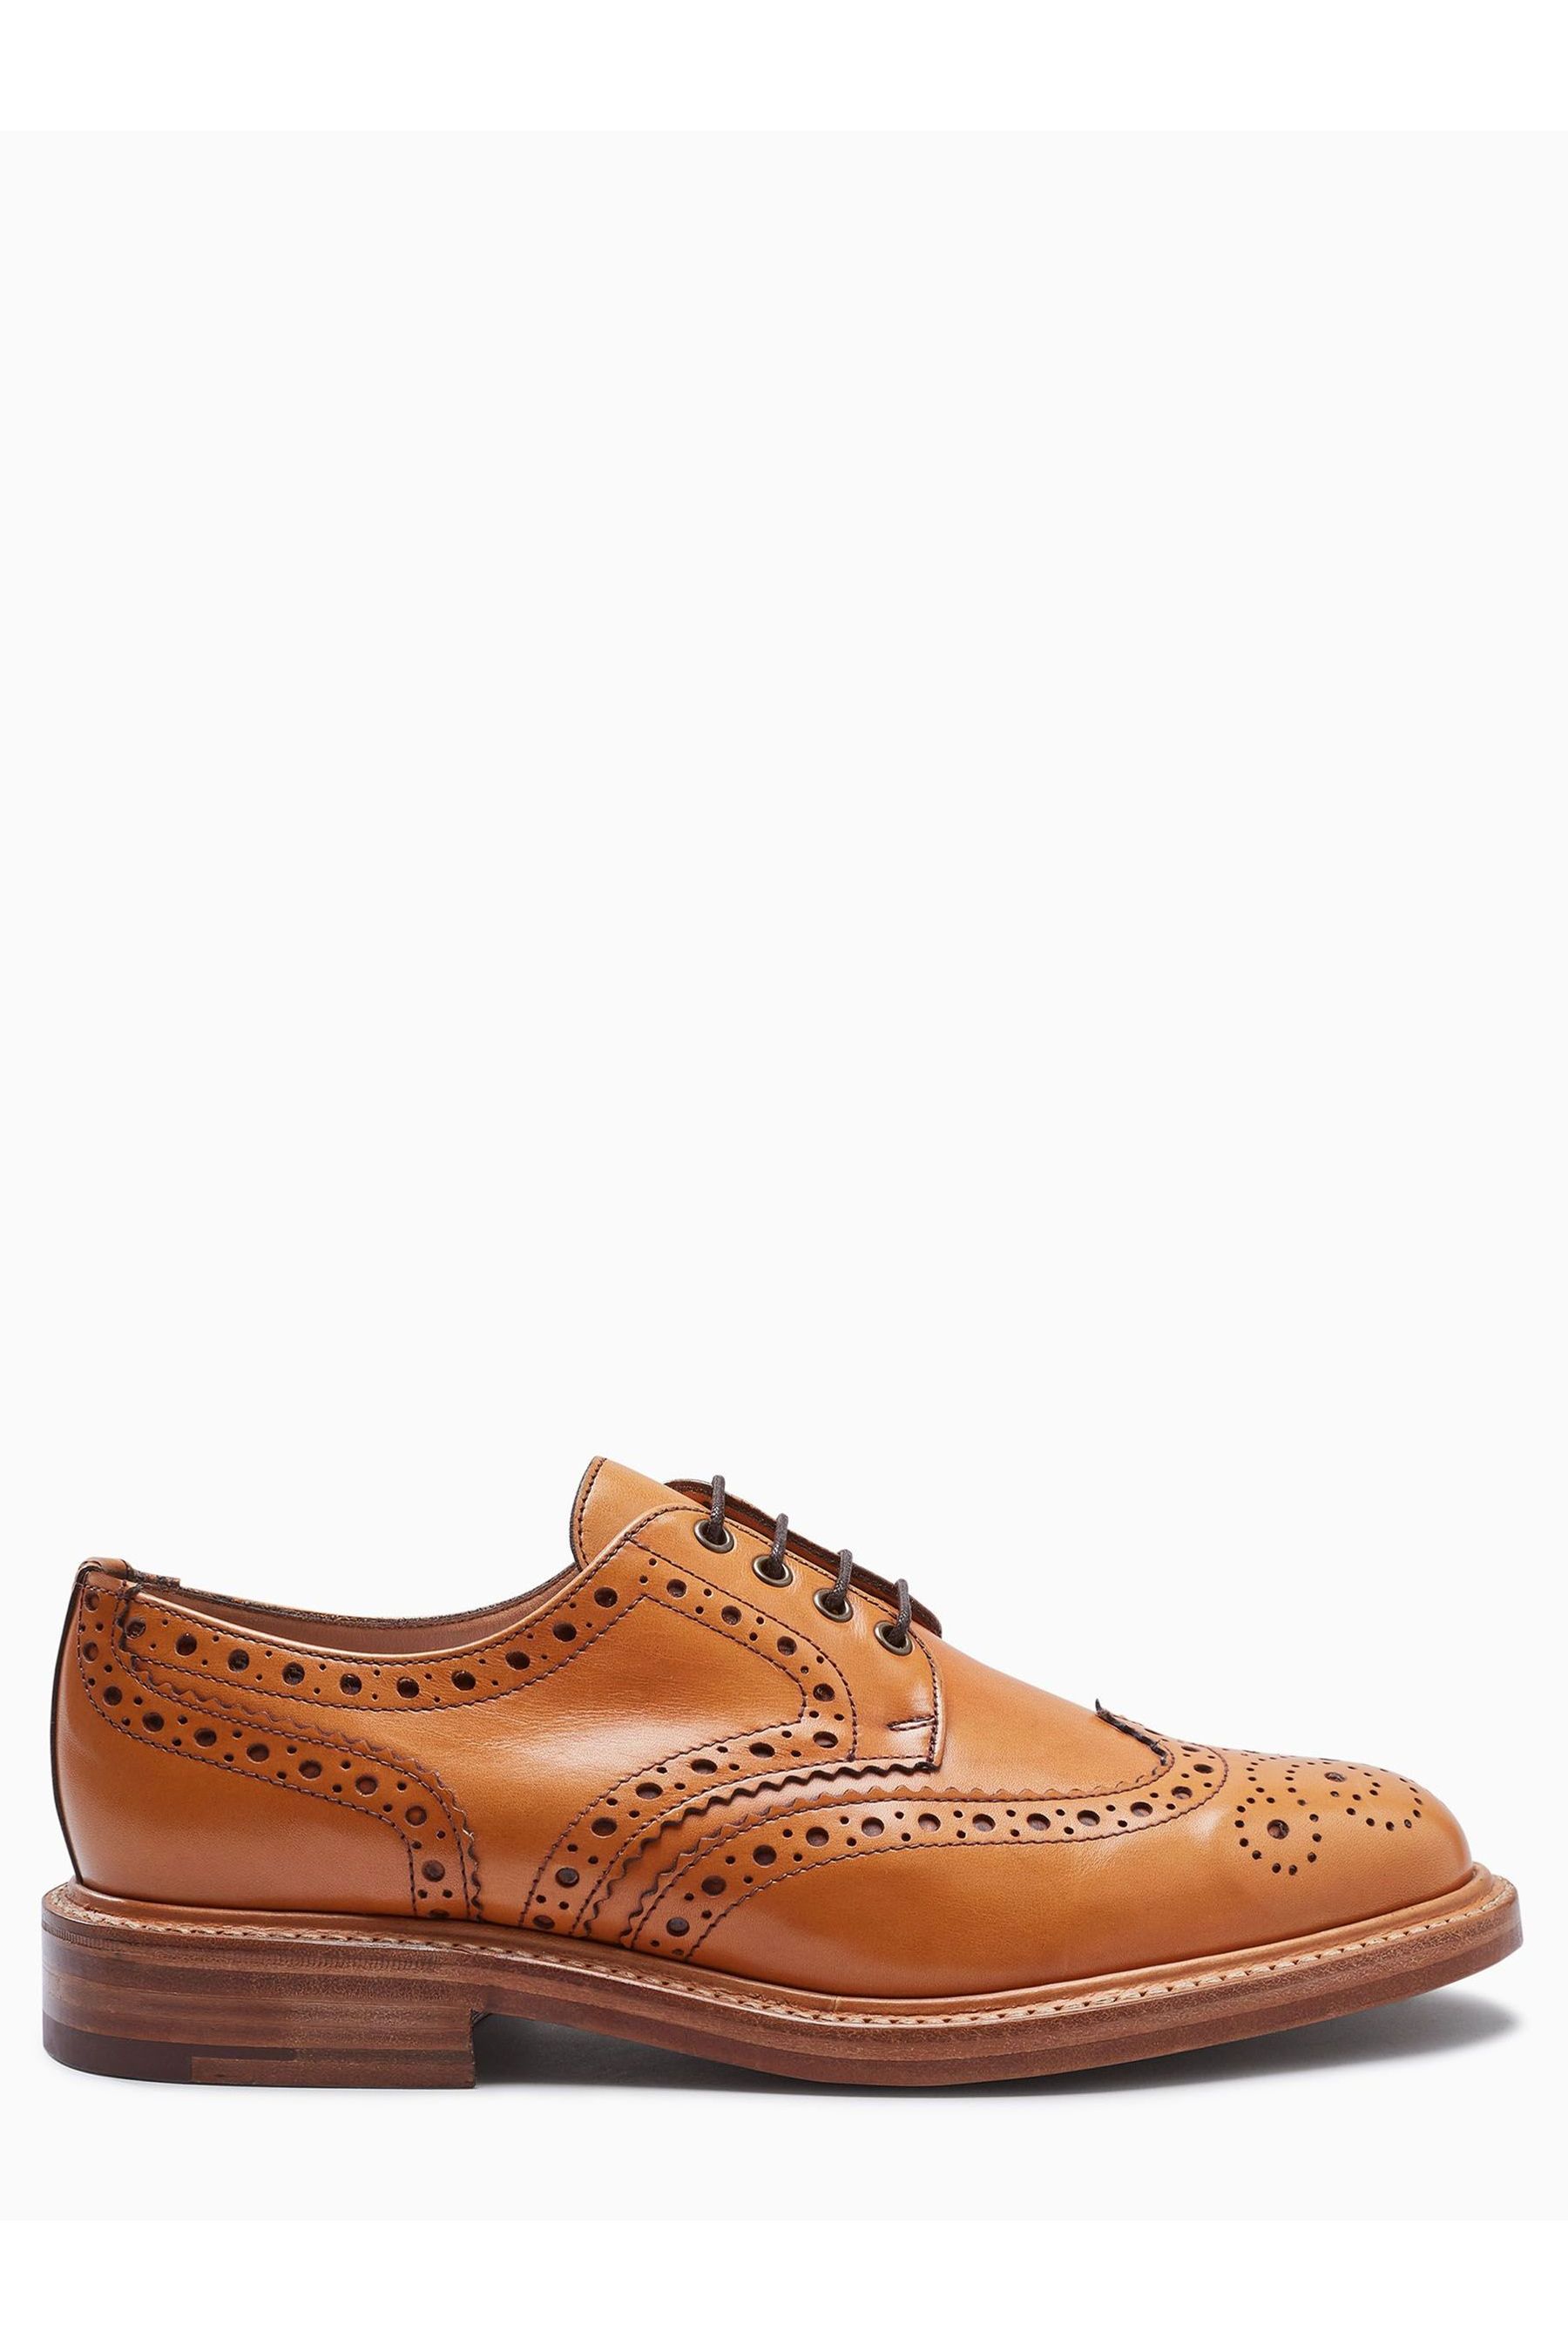 Buy Sanders For Next Brogue Shoe from the Next UK online shop